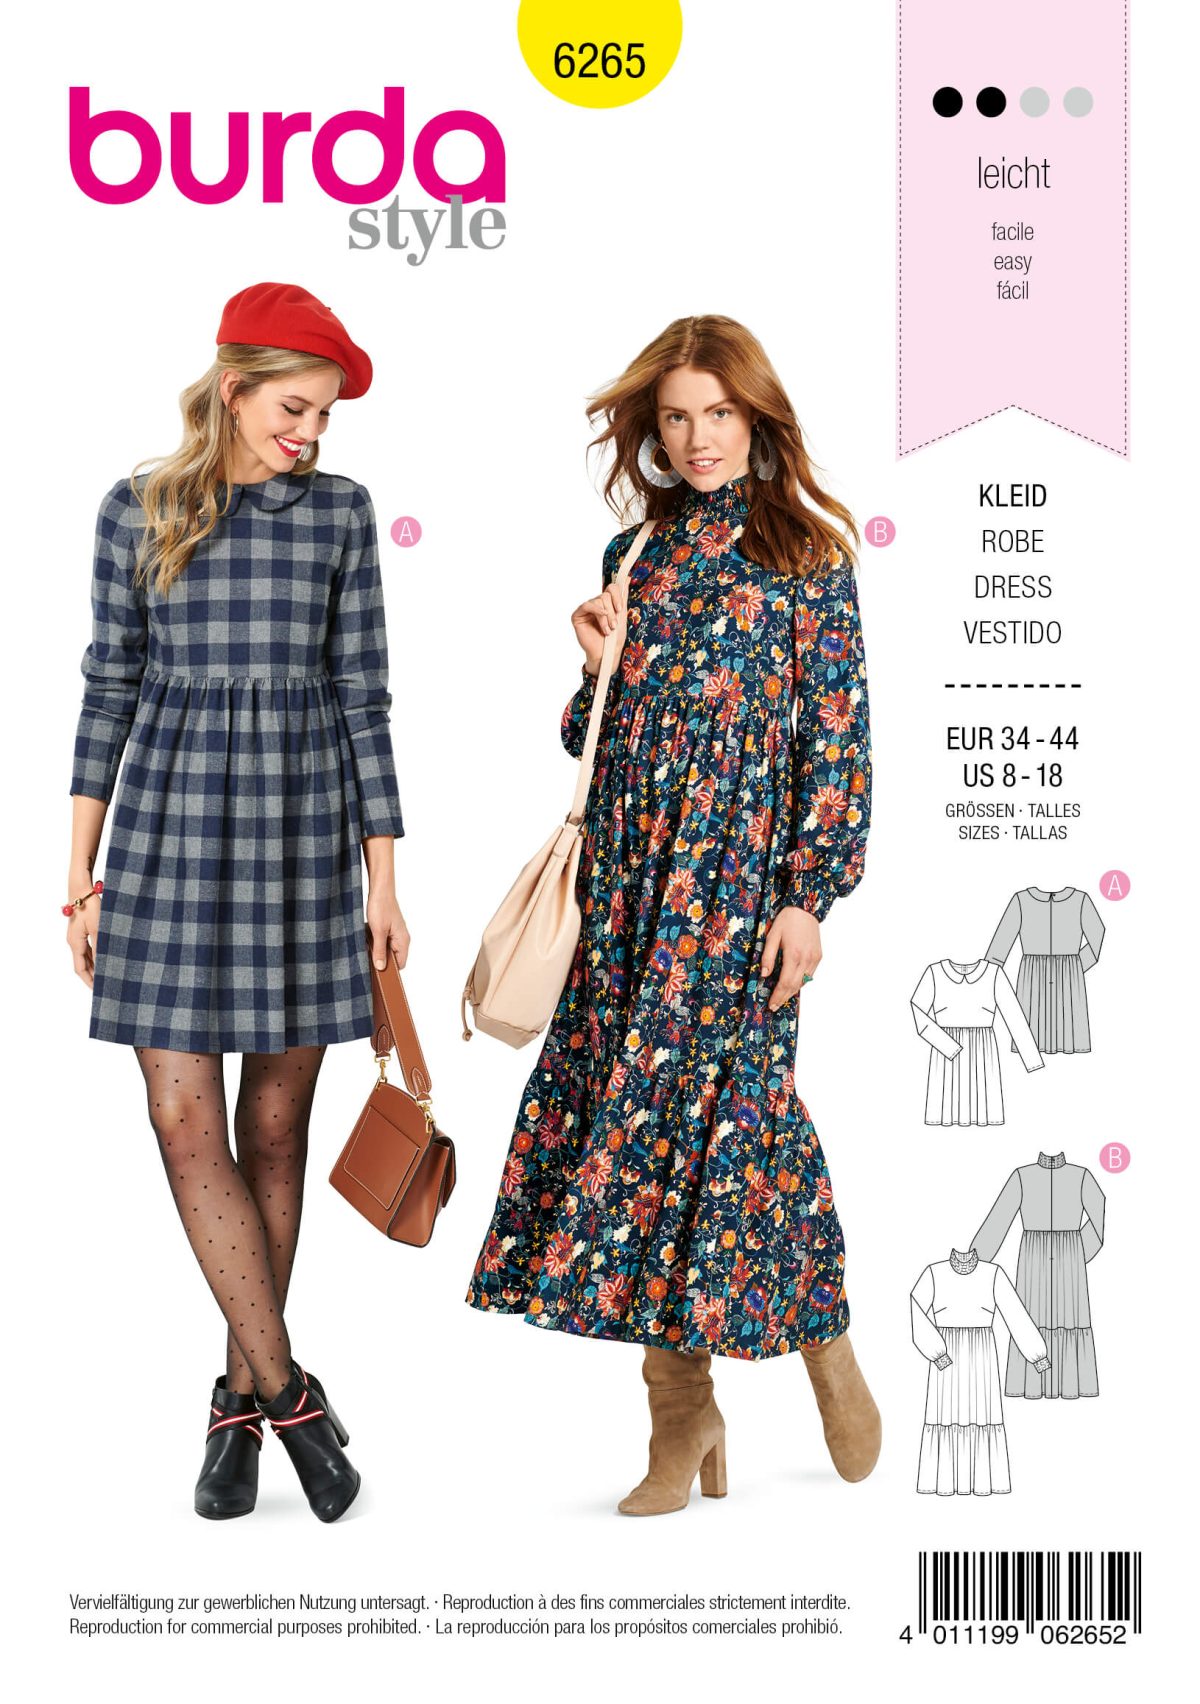 Burda Style Pattern 6265 Misses' Dresses Short or Midi Length with Tiered Skirt